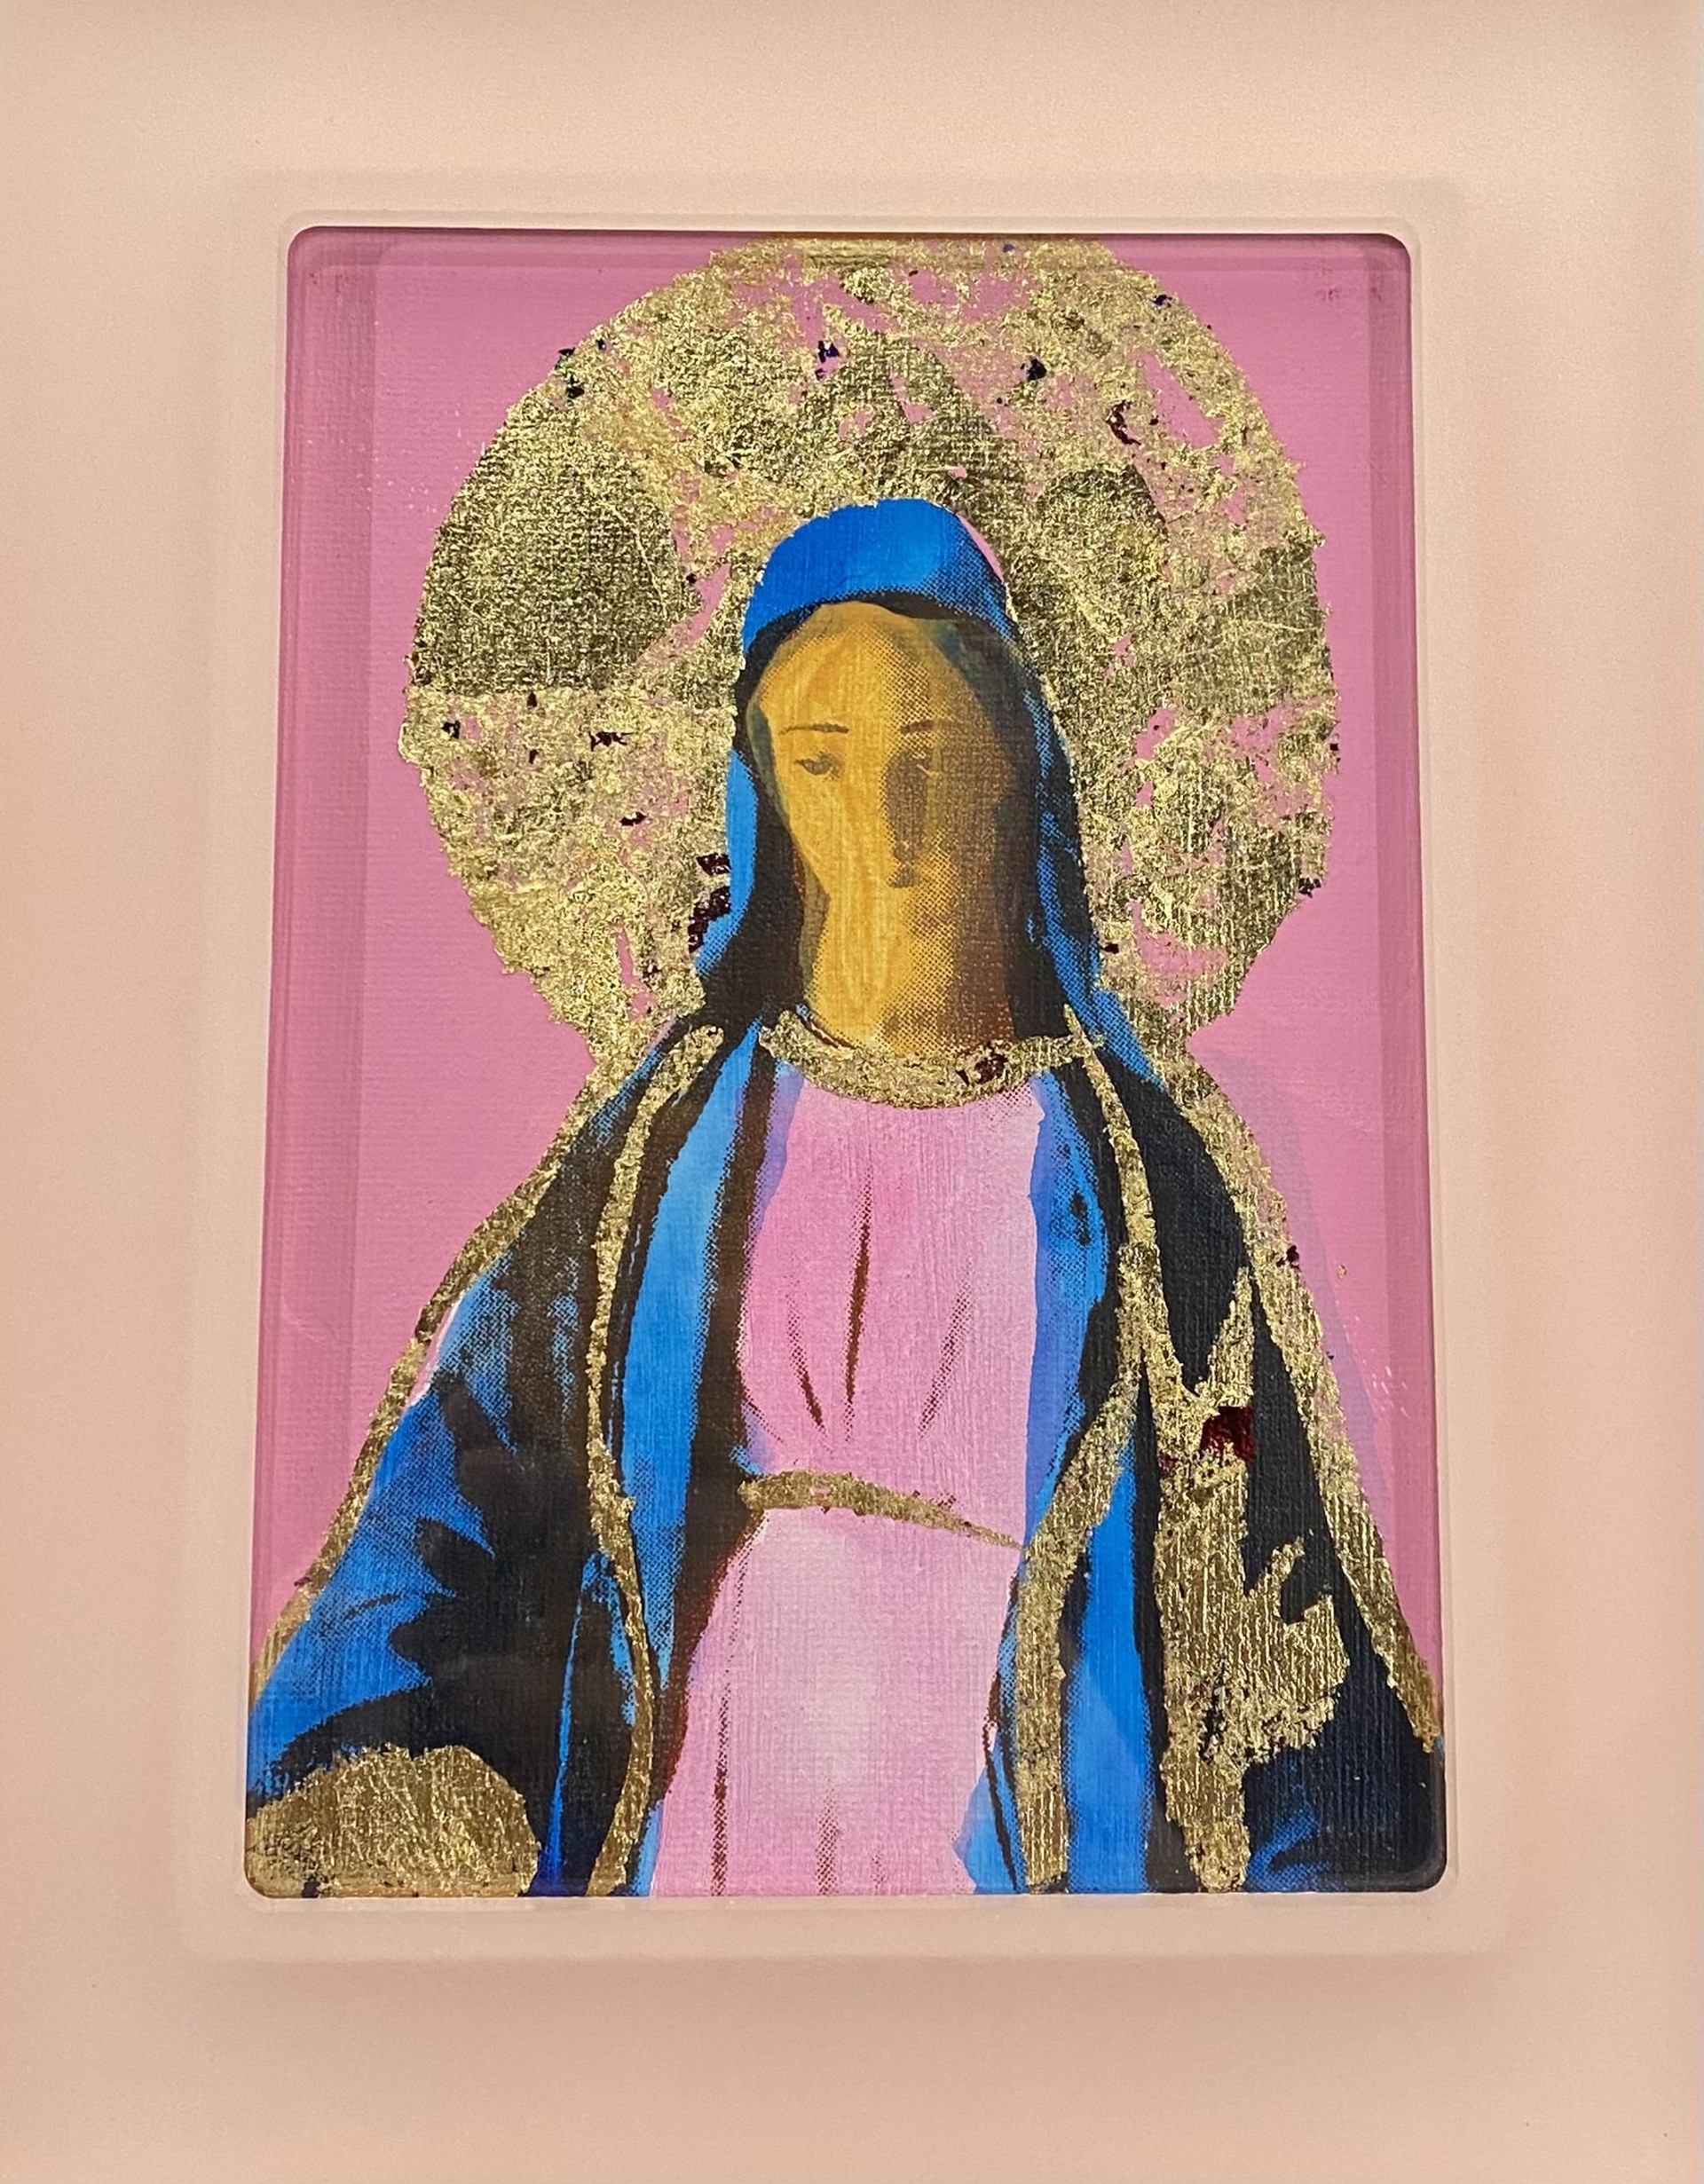 Hail Mary 19 by Megan Coonelly